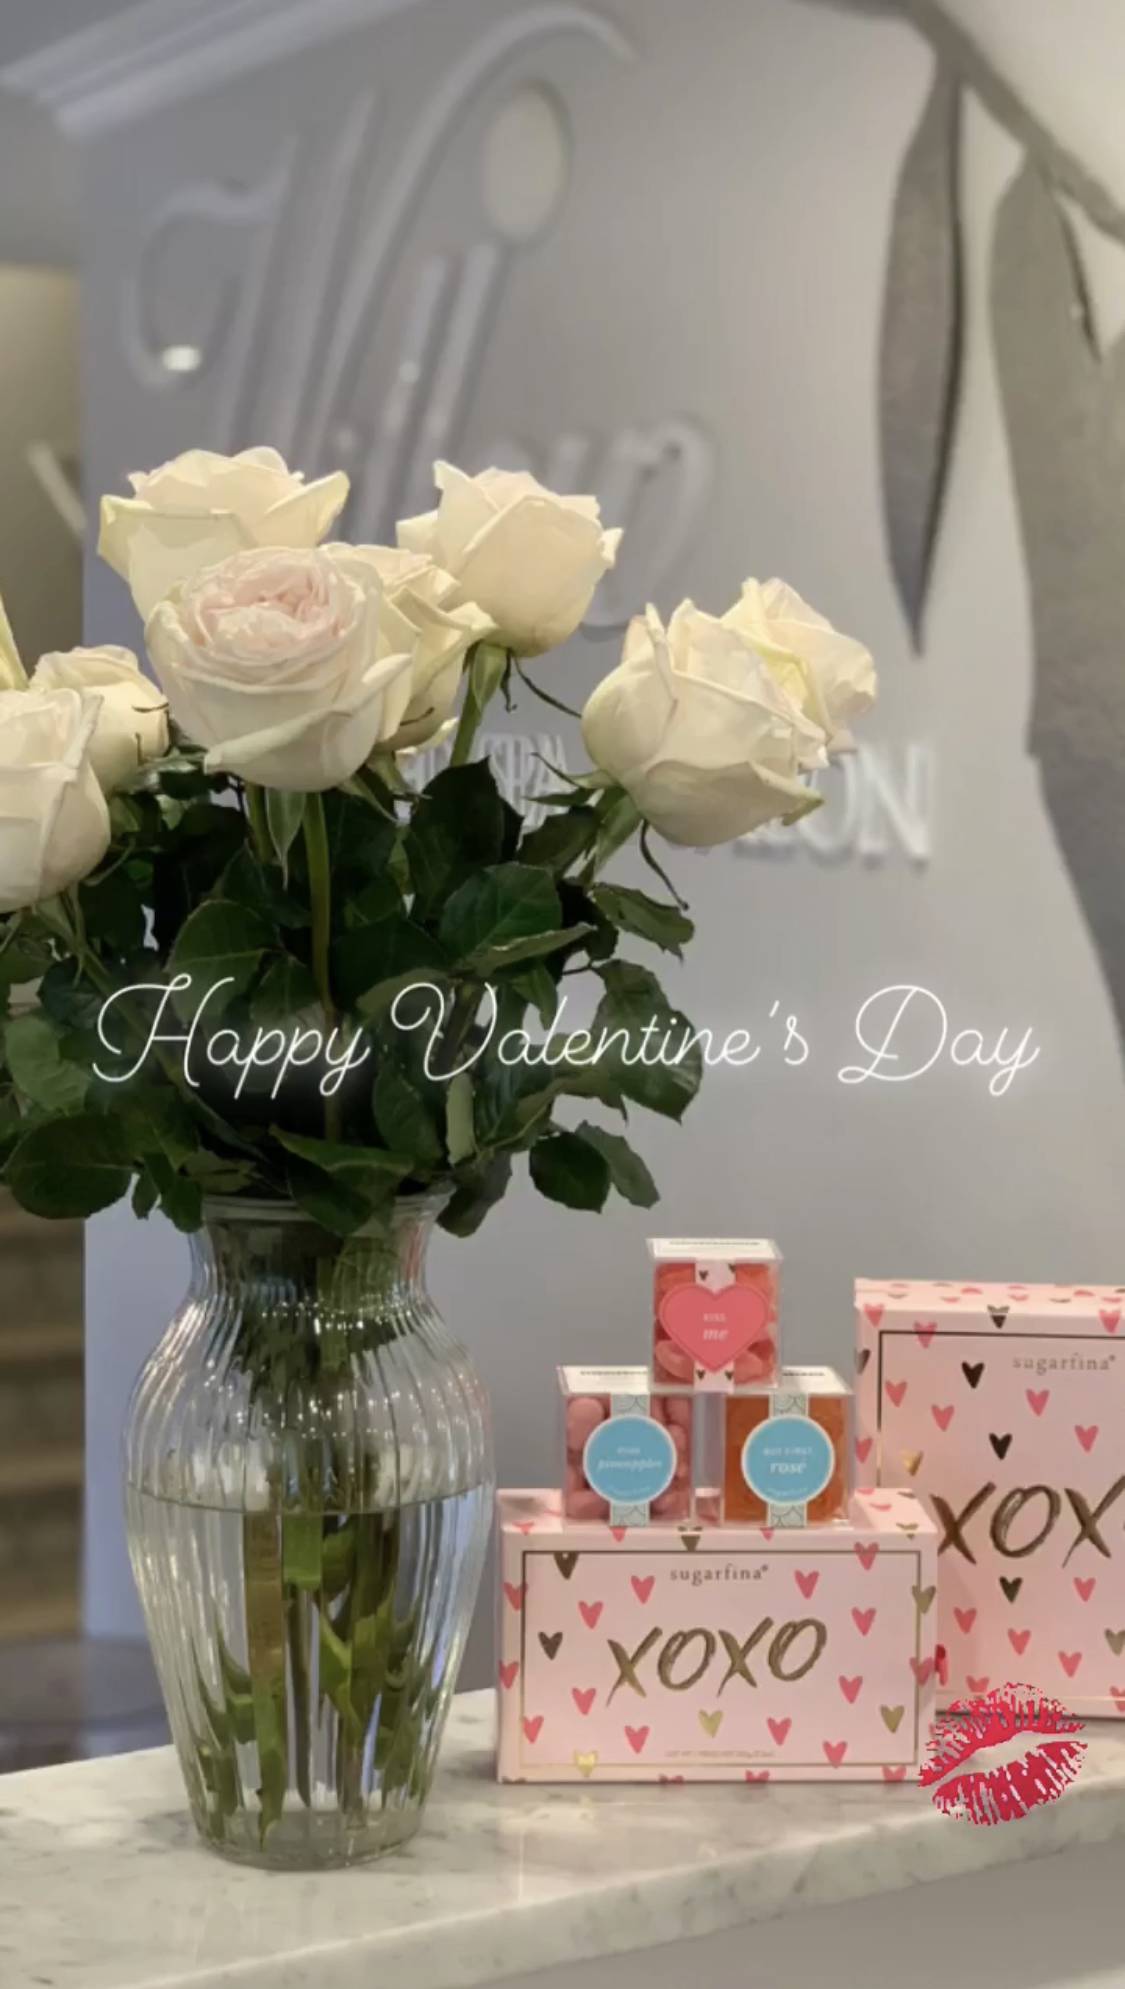 Valentine’s Day Thoughts | Willow Med Spa & Salon | Morgantown, WV